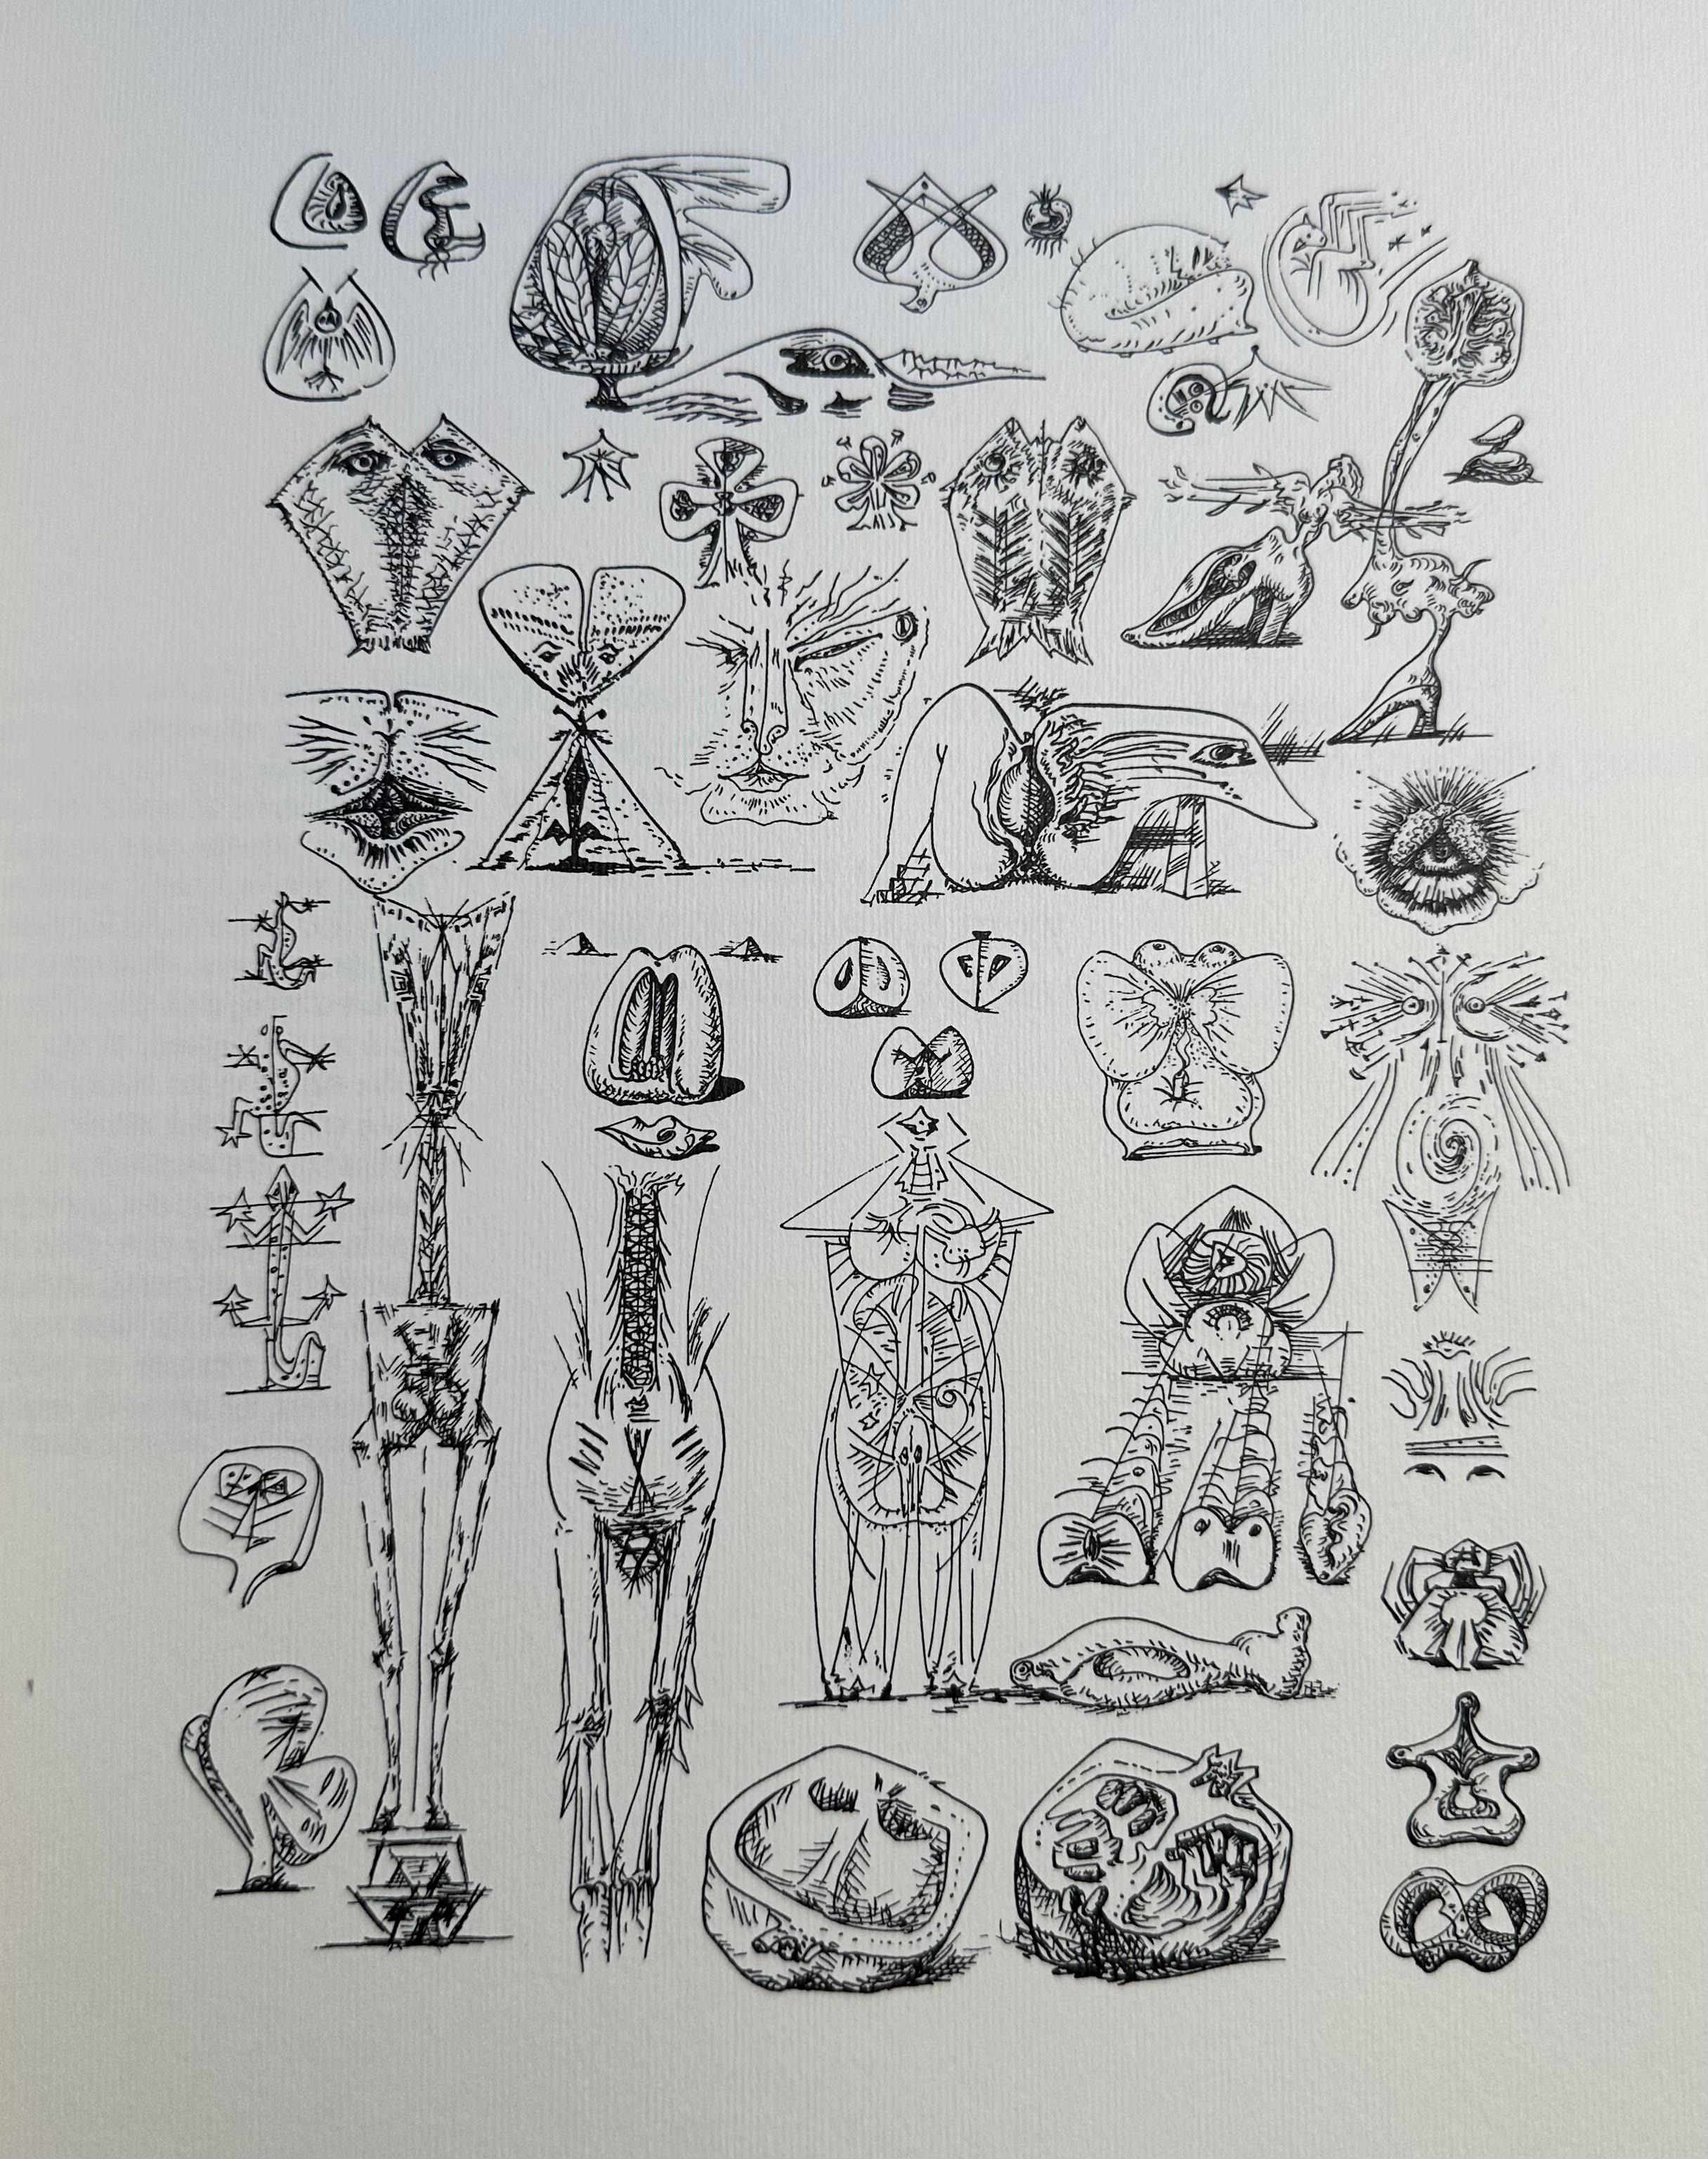 Reprint of Andre Masson's book from 1939.  Printed on heavy wove paper.  30 plates of black and white drawings.